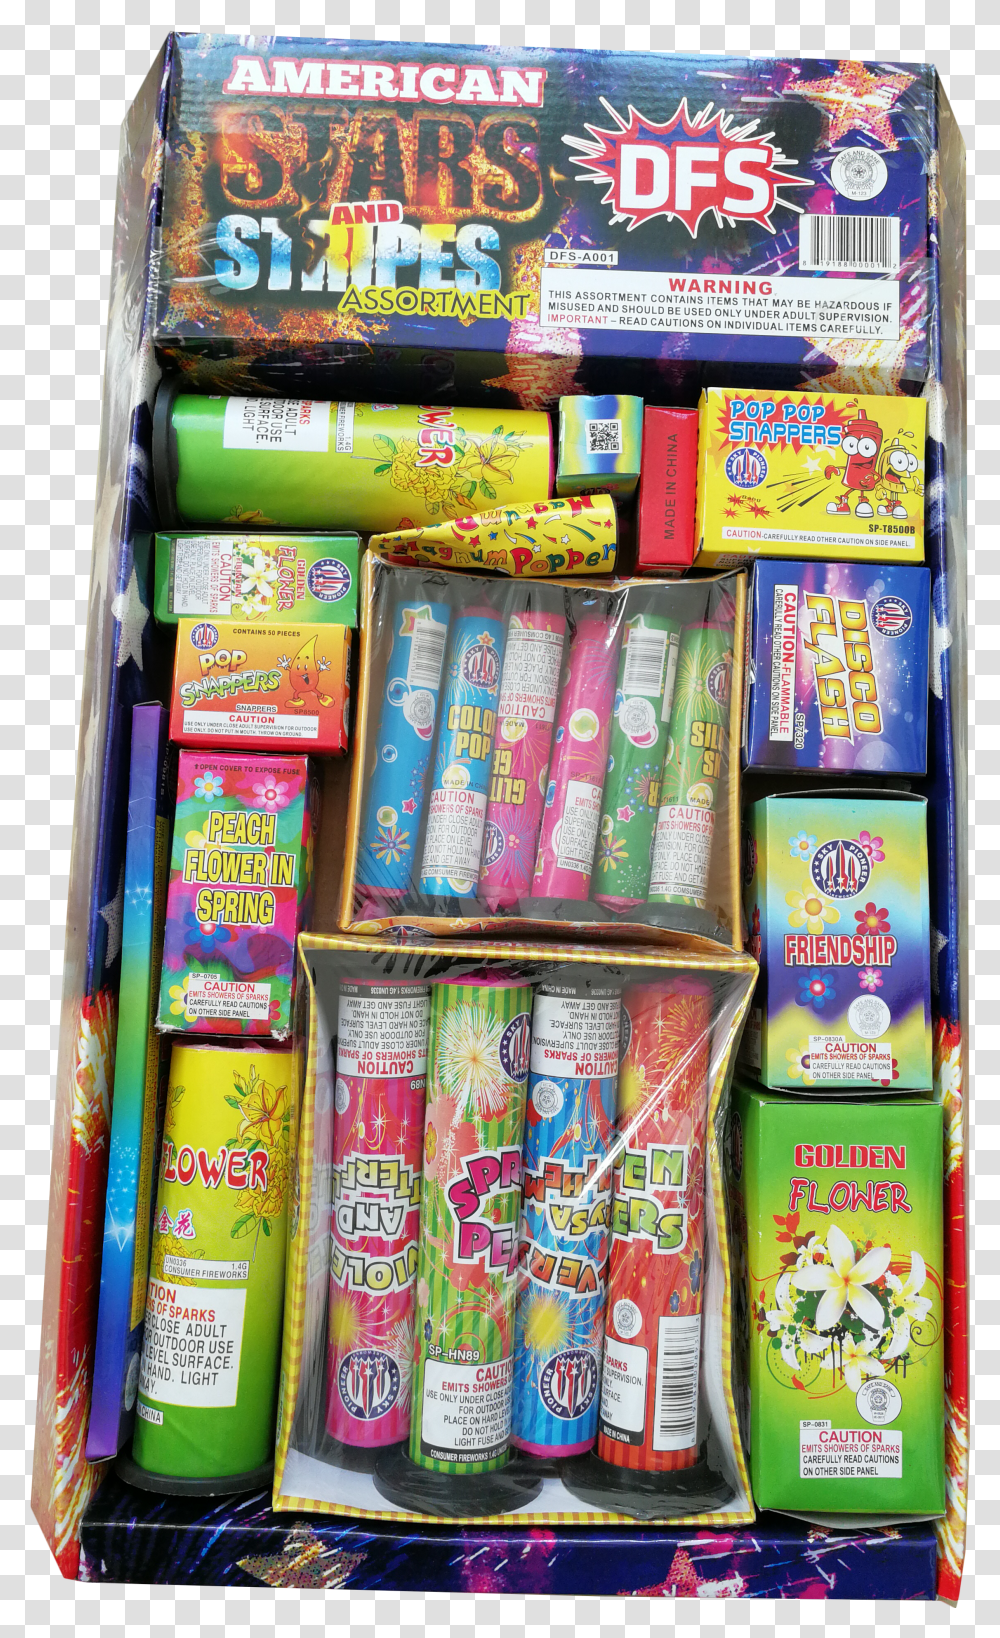 American Stars And Stripes - Discount Fireworks Superstore Transparent Png